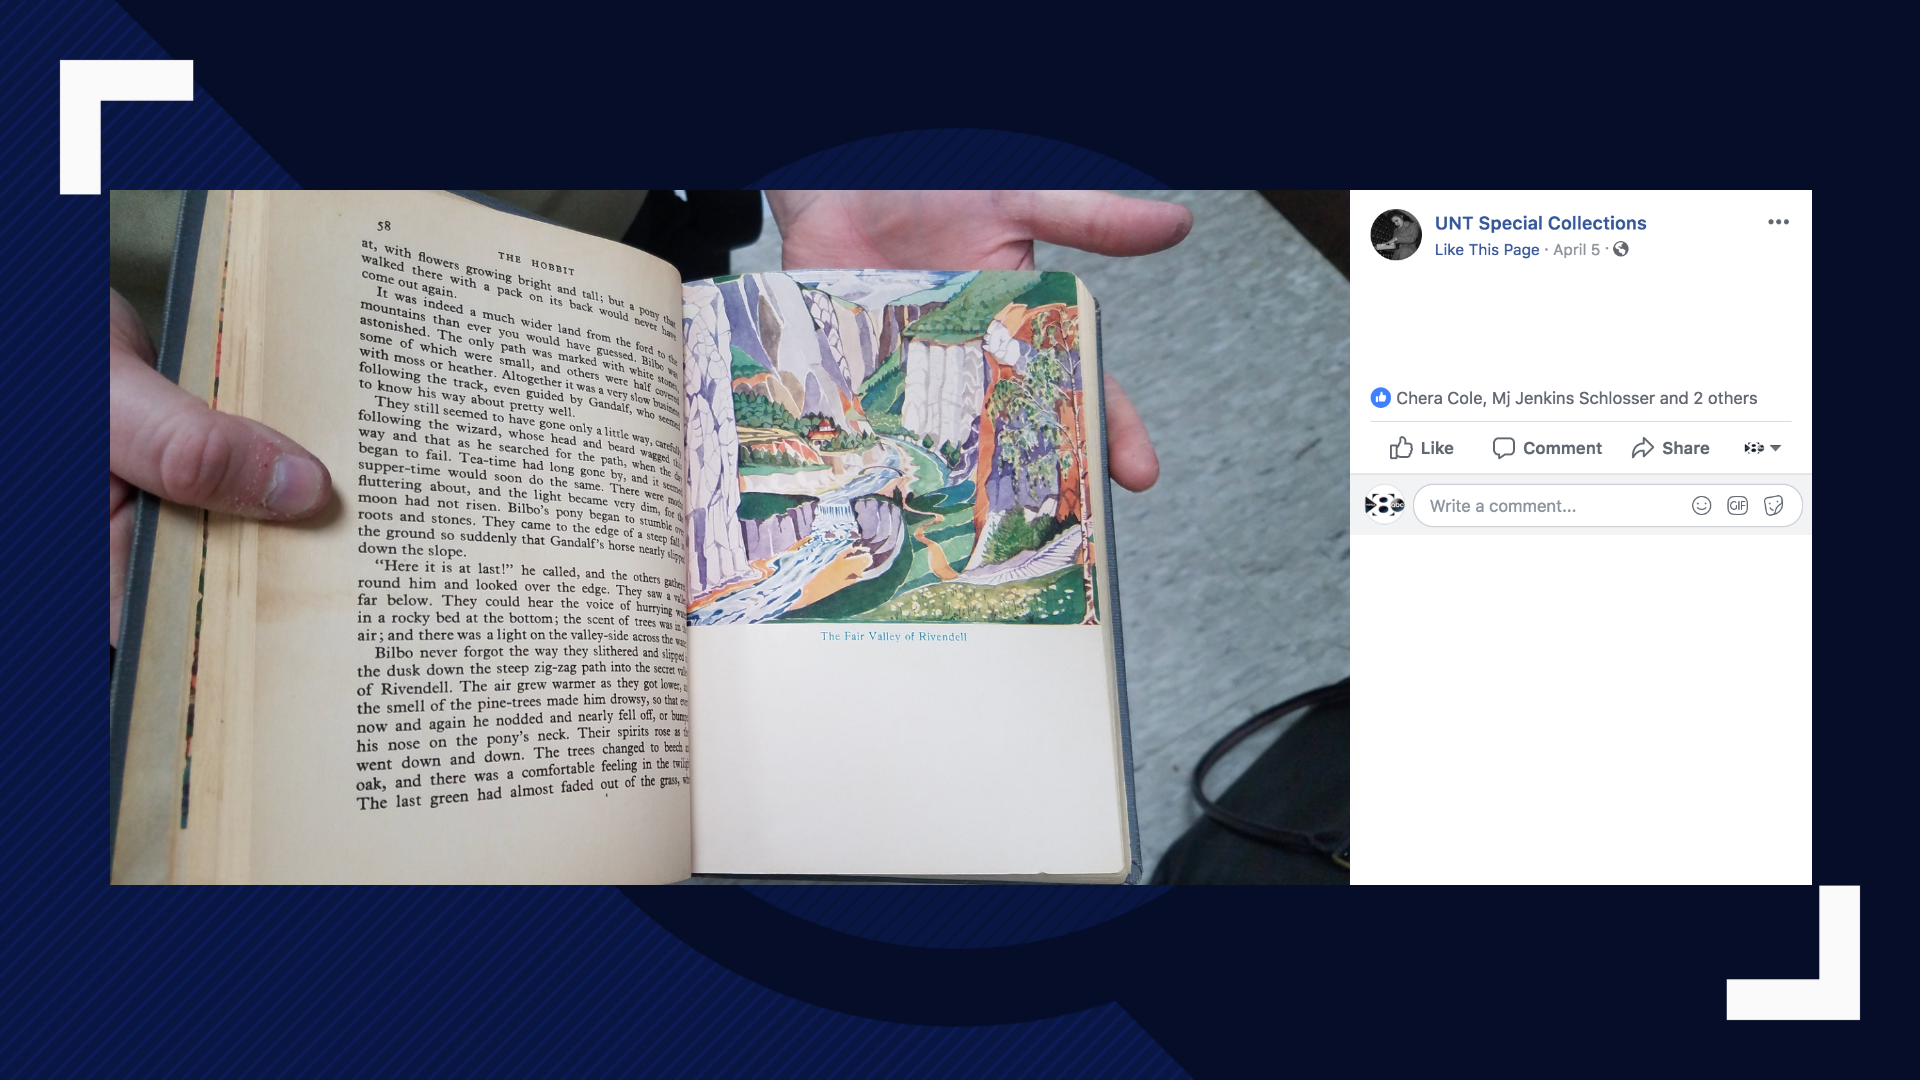 Someone took the book from the UNT library 45 years ago.